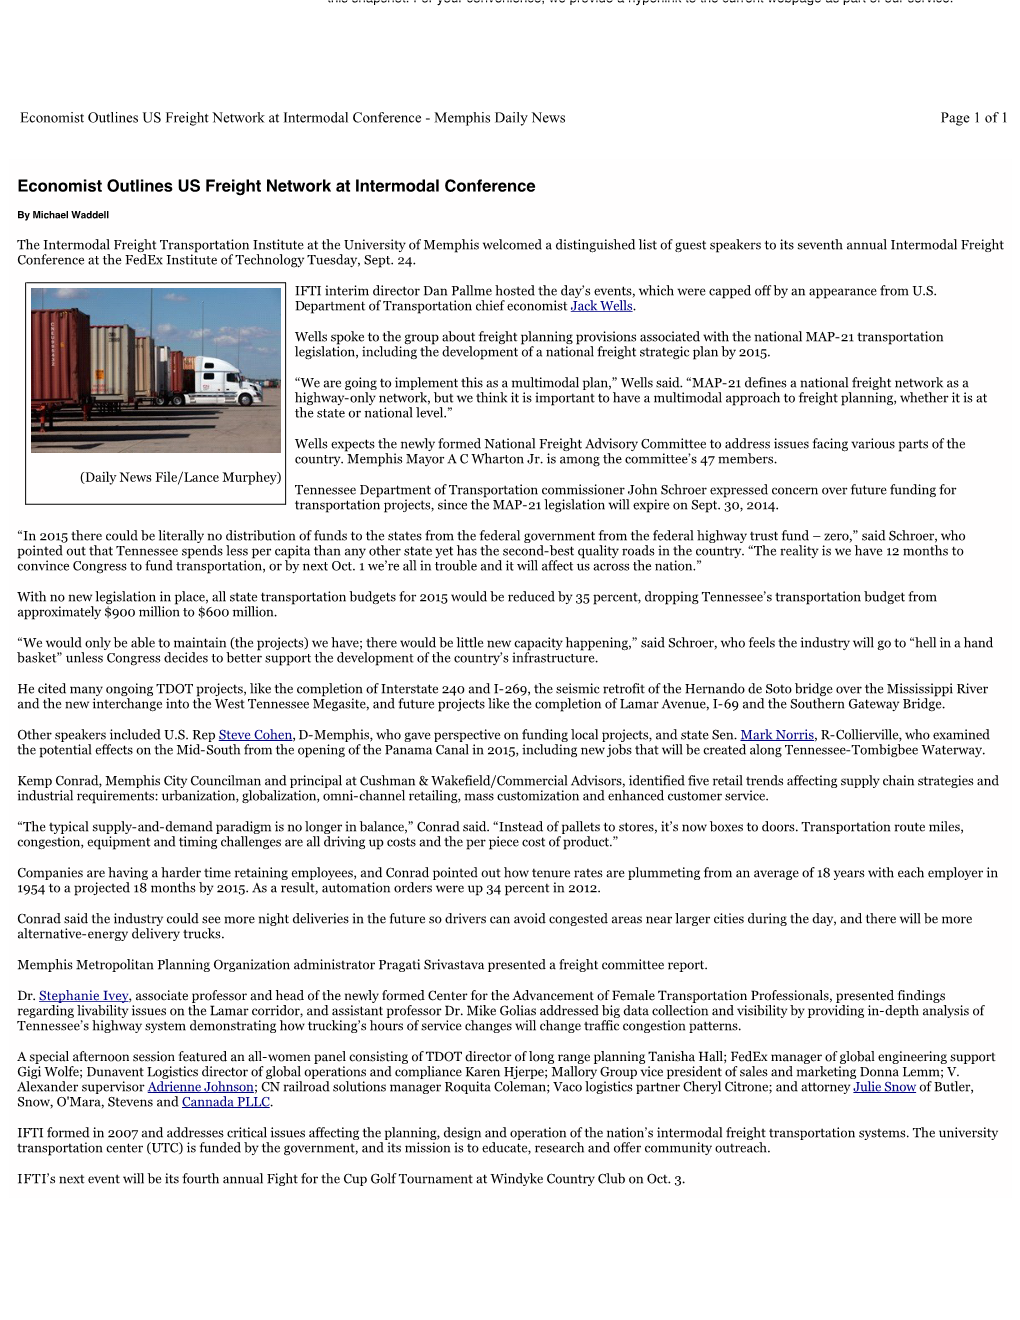 Economist Outlines US Freight Network at Intermodal Conference